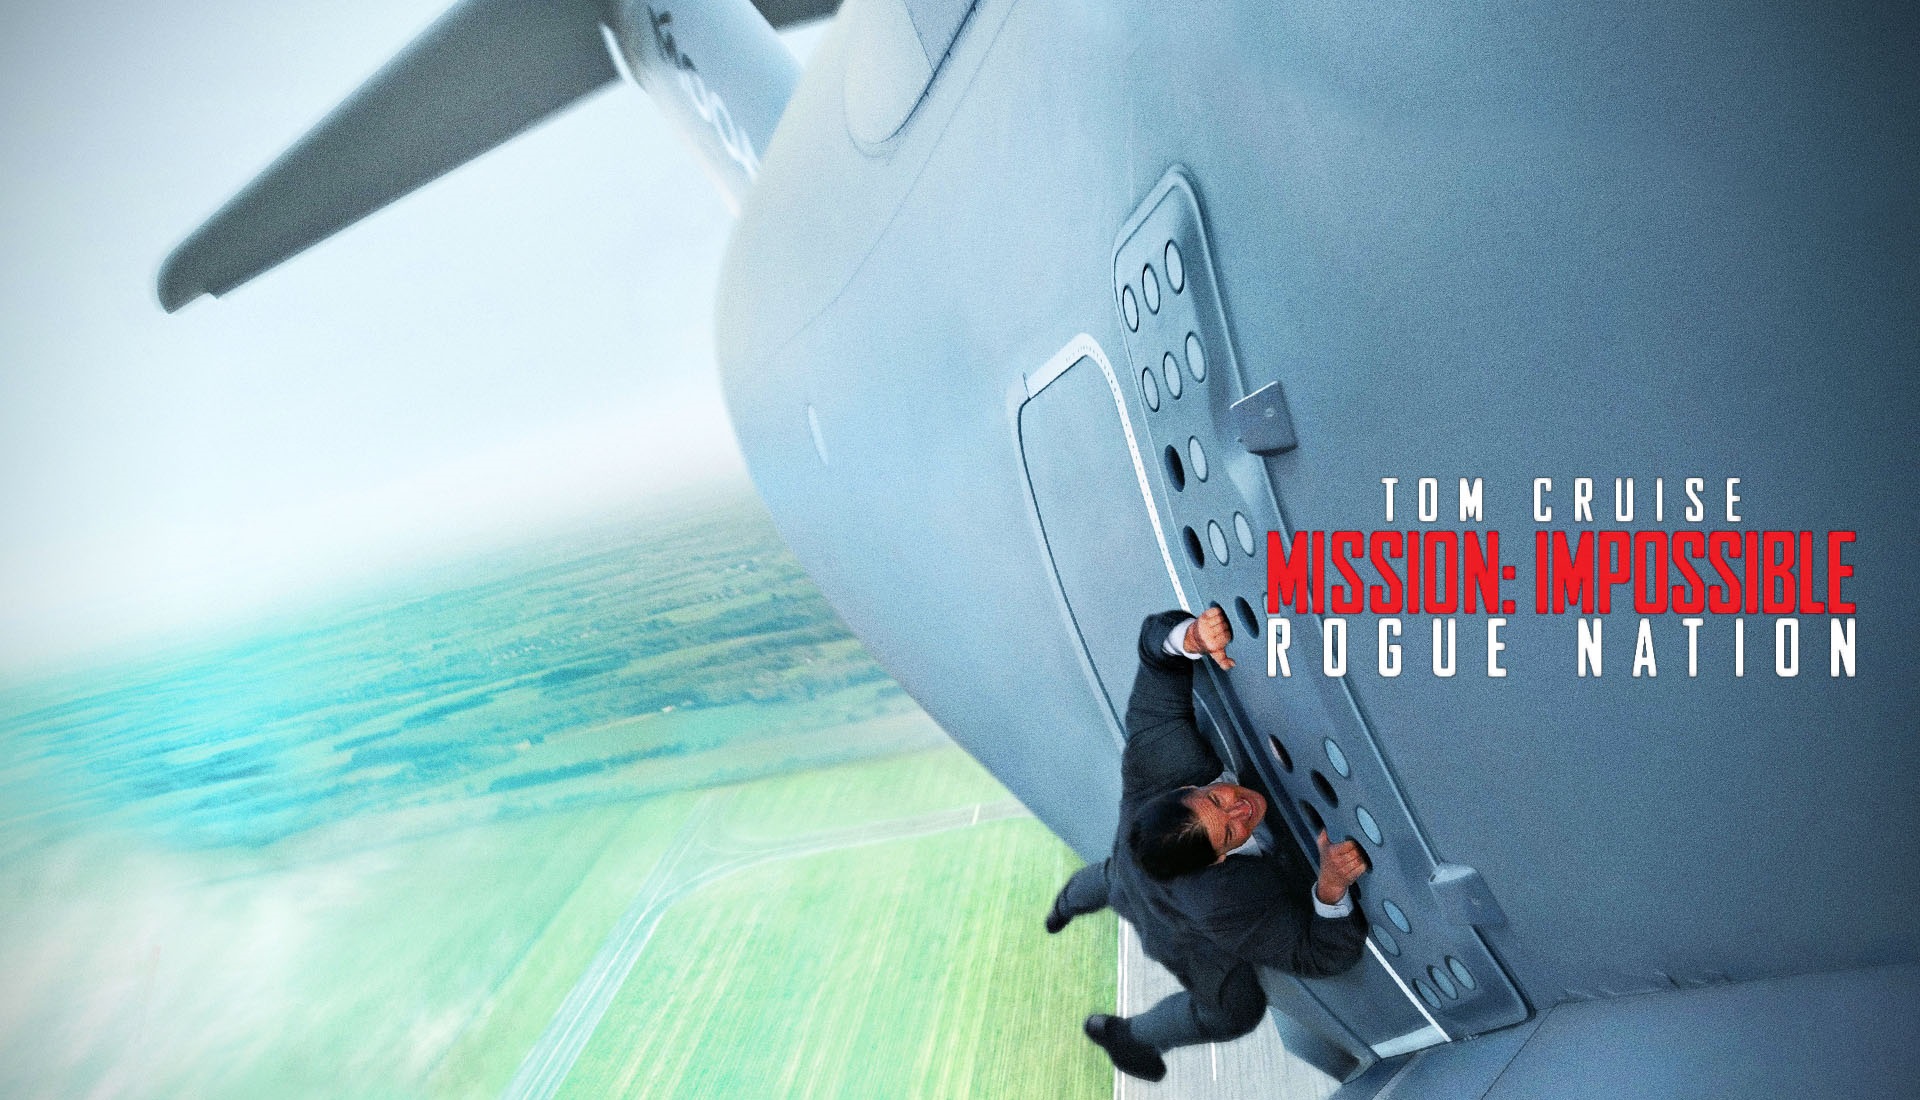 Movie Review: “Mission: Impossible – Rogue Nation”